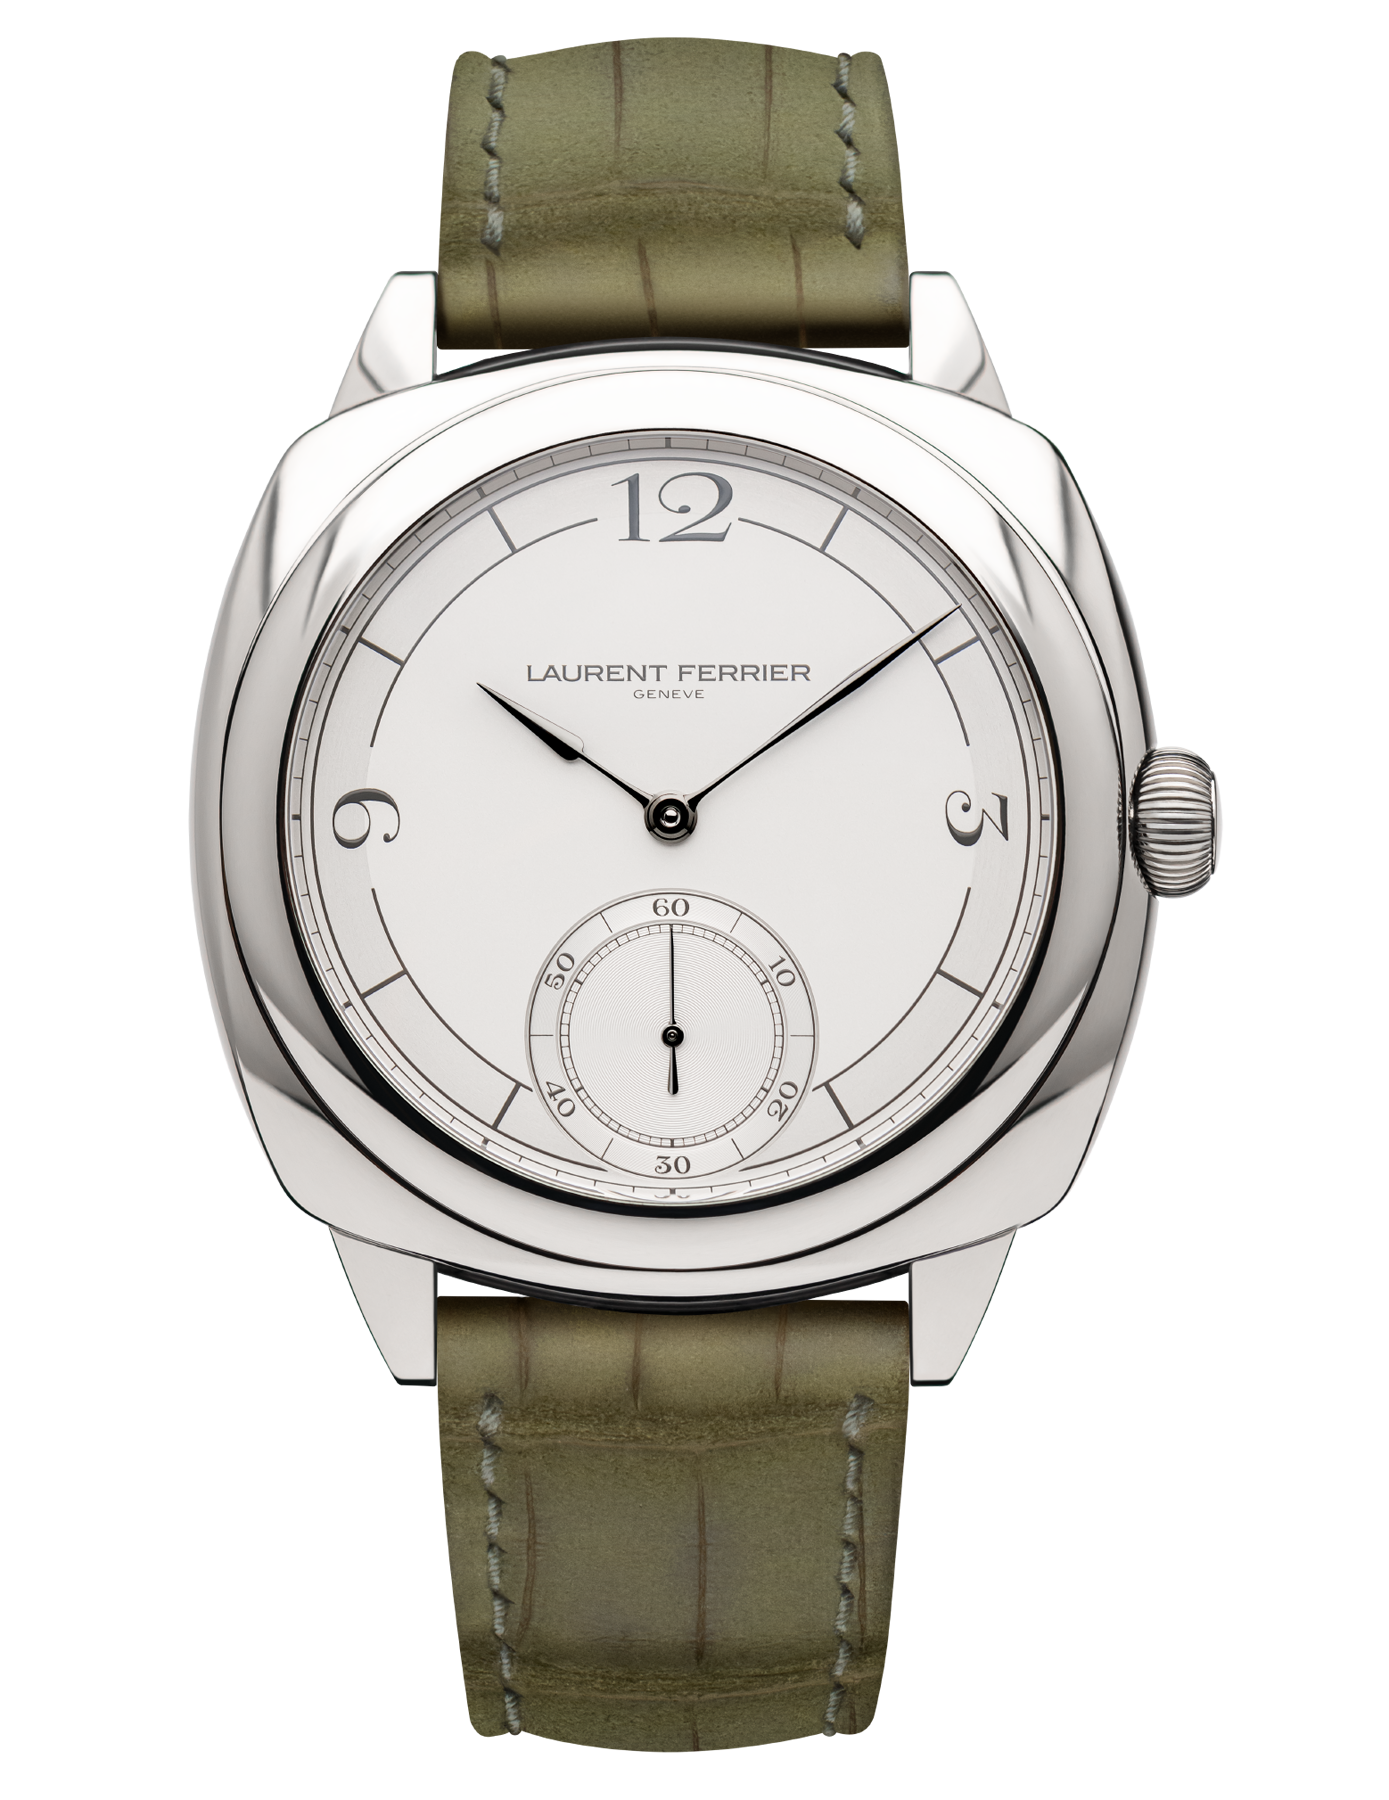 Laurent ferrier square micro rotor retro white stainless steel case watch lcf0013. Ac. G3n front soldat hd